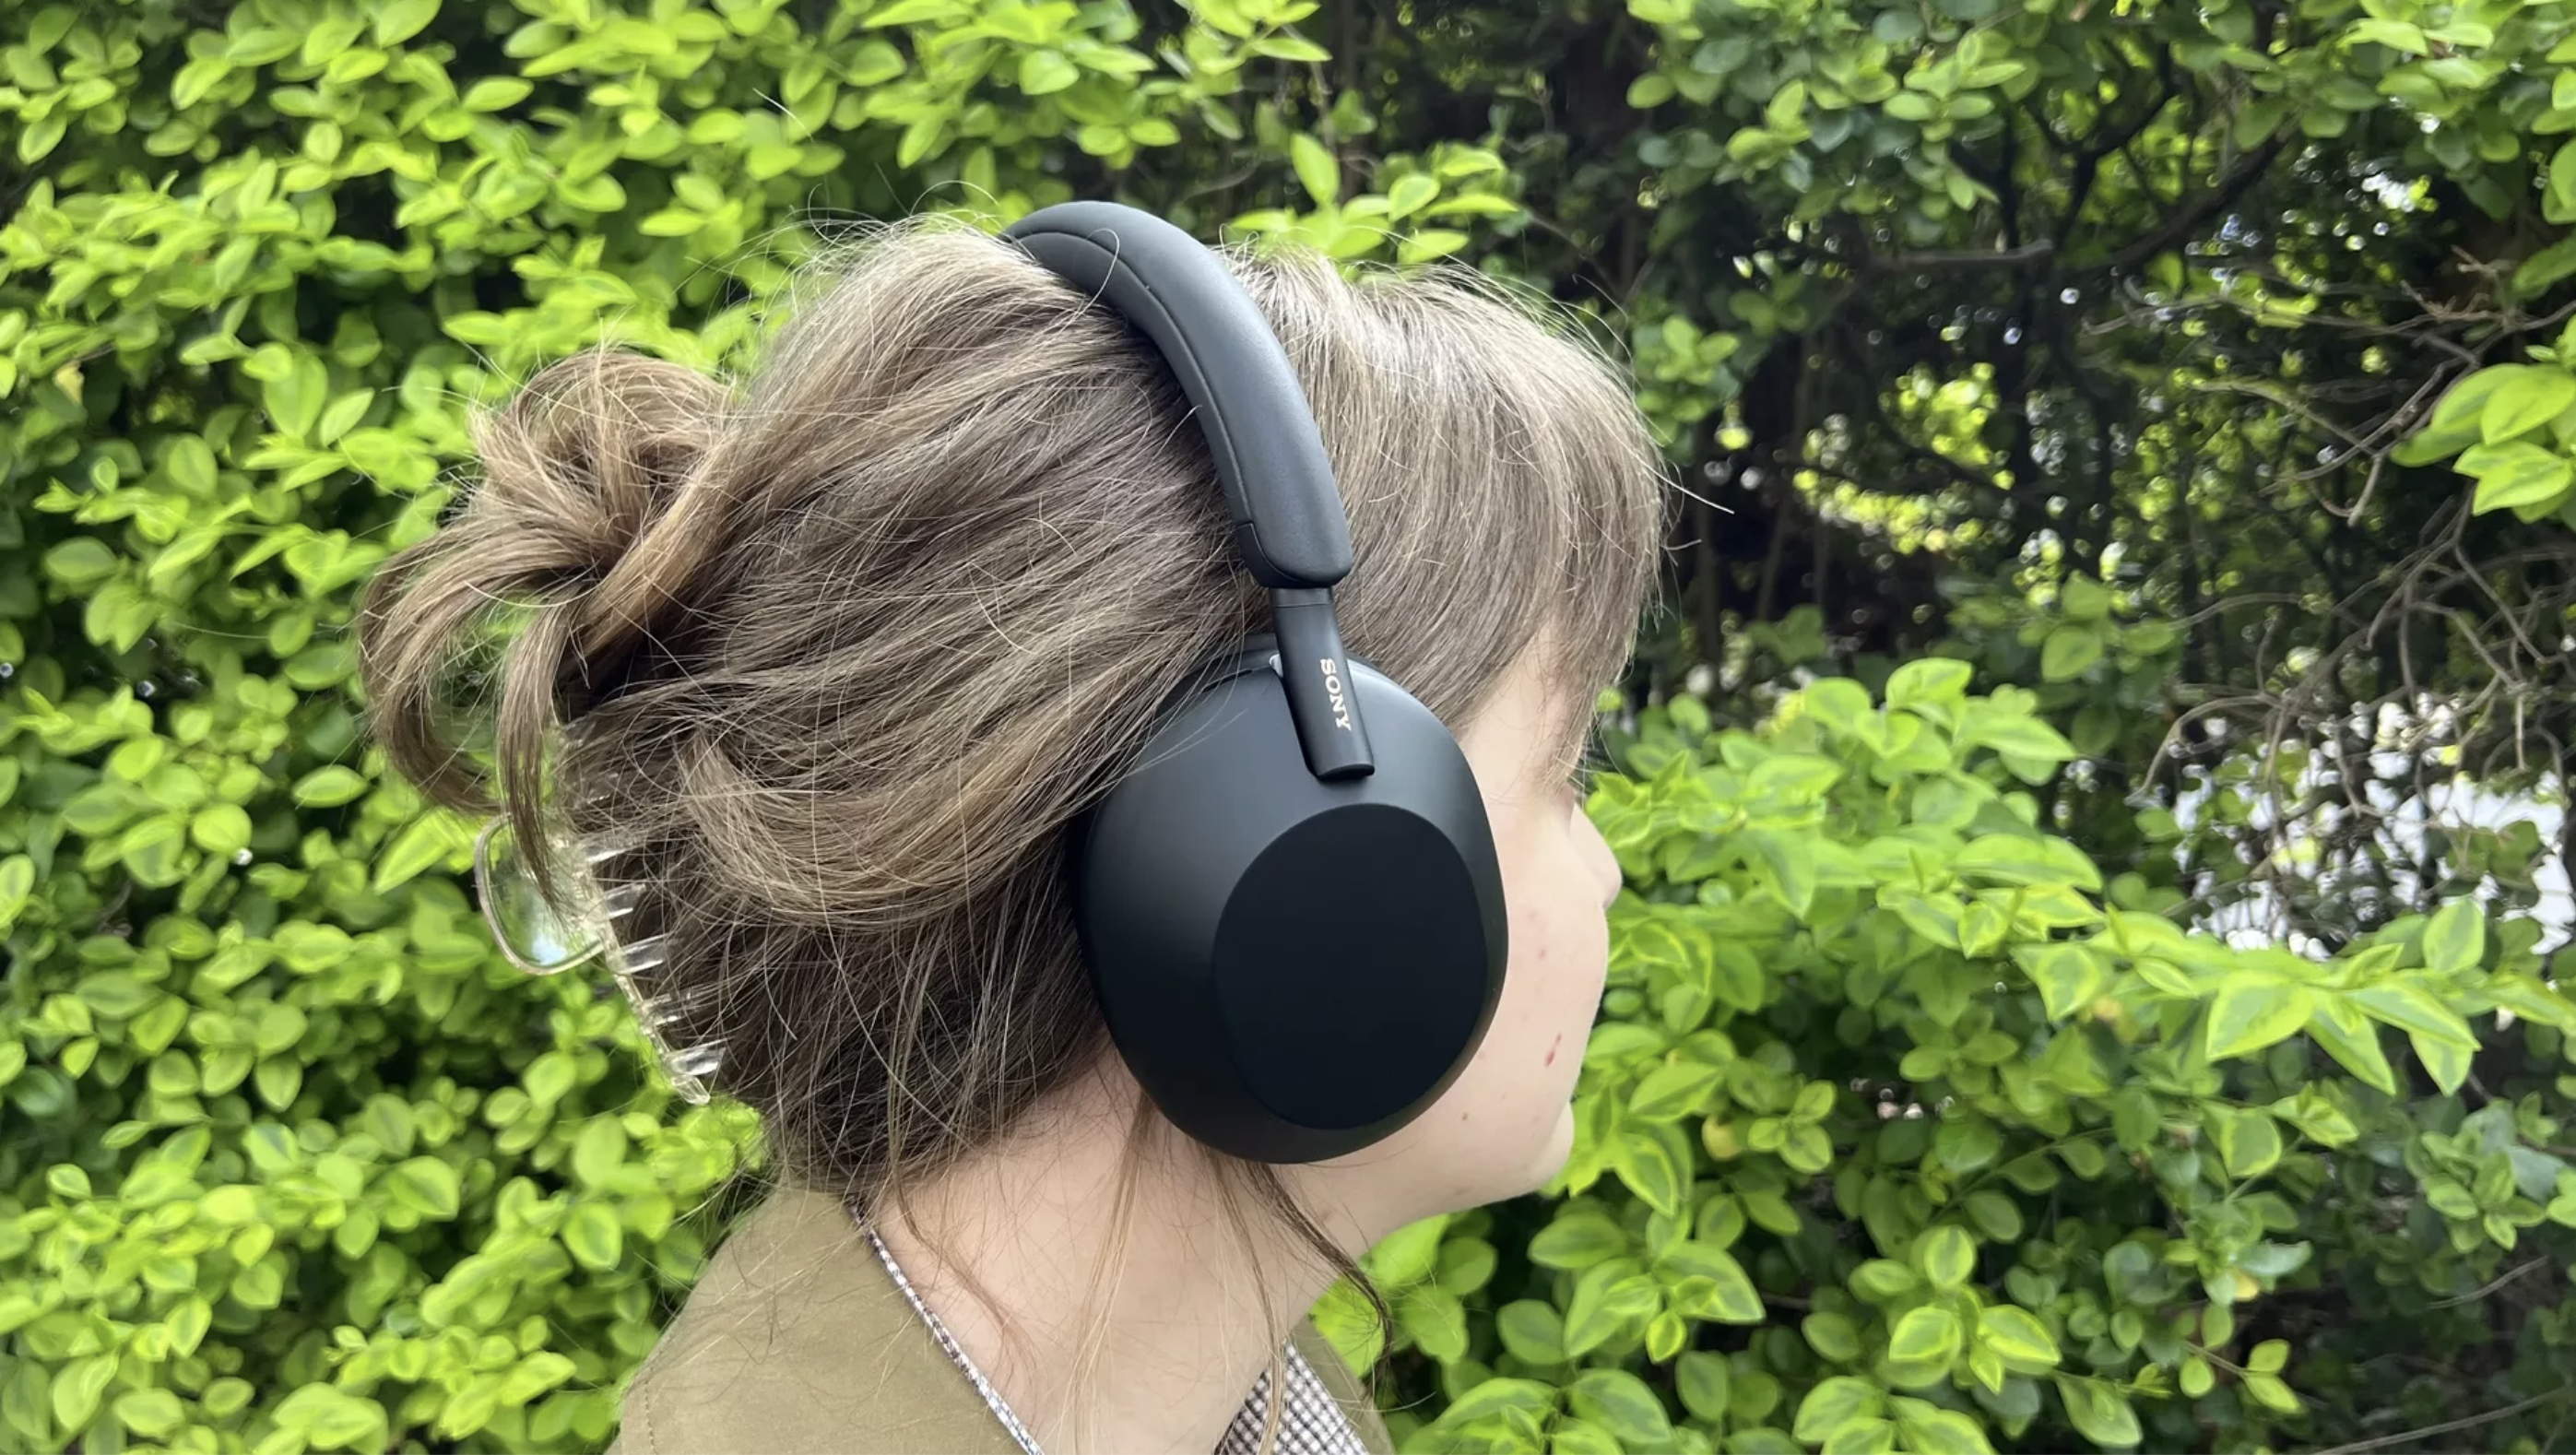 The Sony WH-1000XM5 wireless headphones in black being worn by a member of the TechRadar team outside in front of a green hedge.